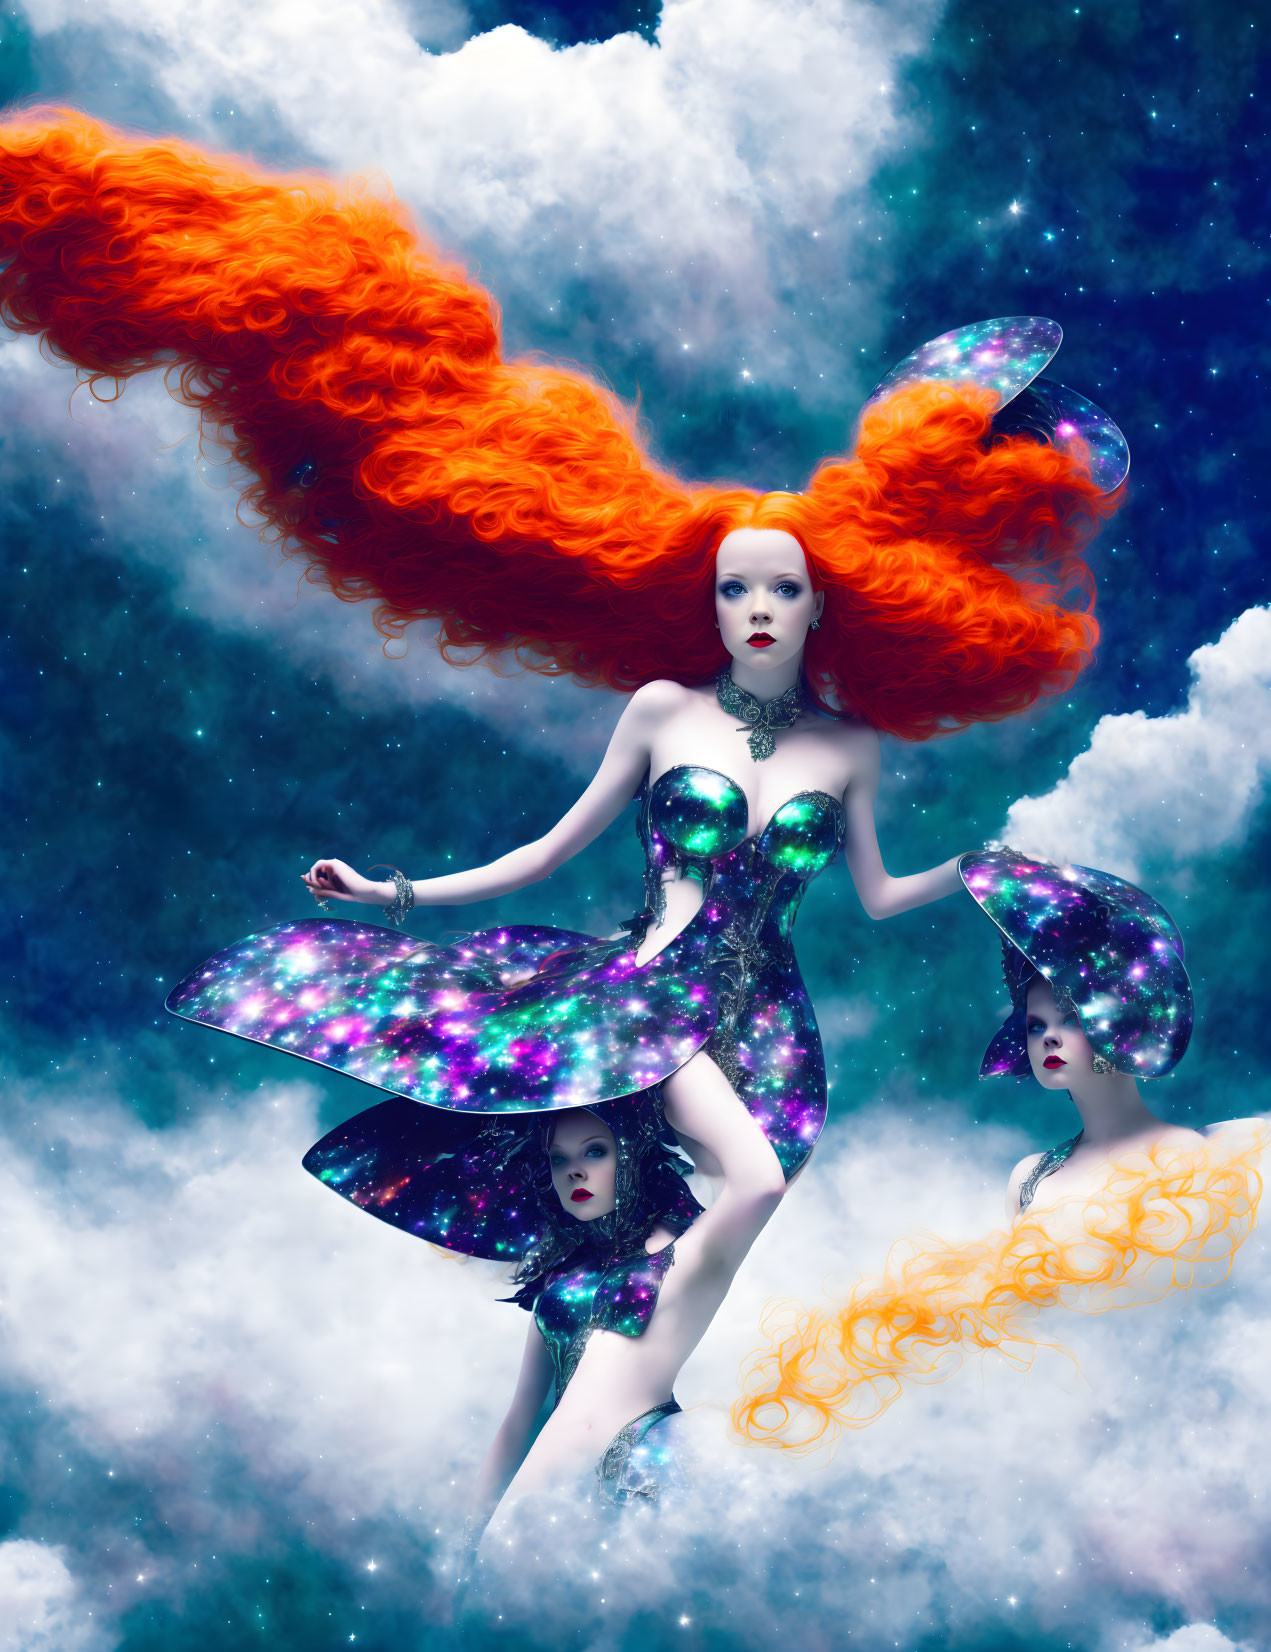 Vibrant red-haired woman in cosmic dress floating among clouds